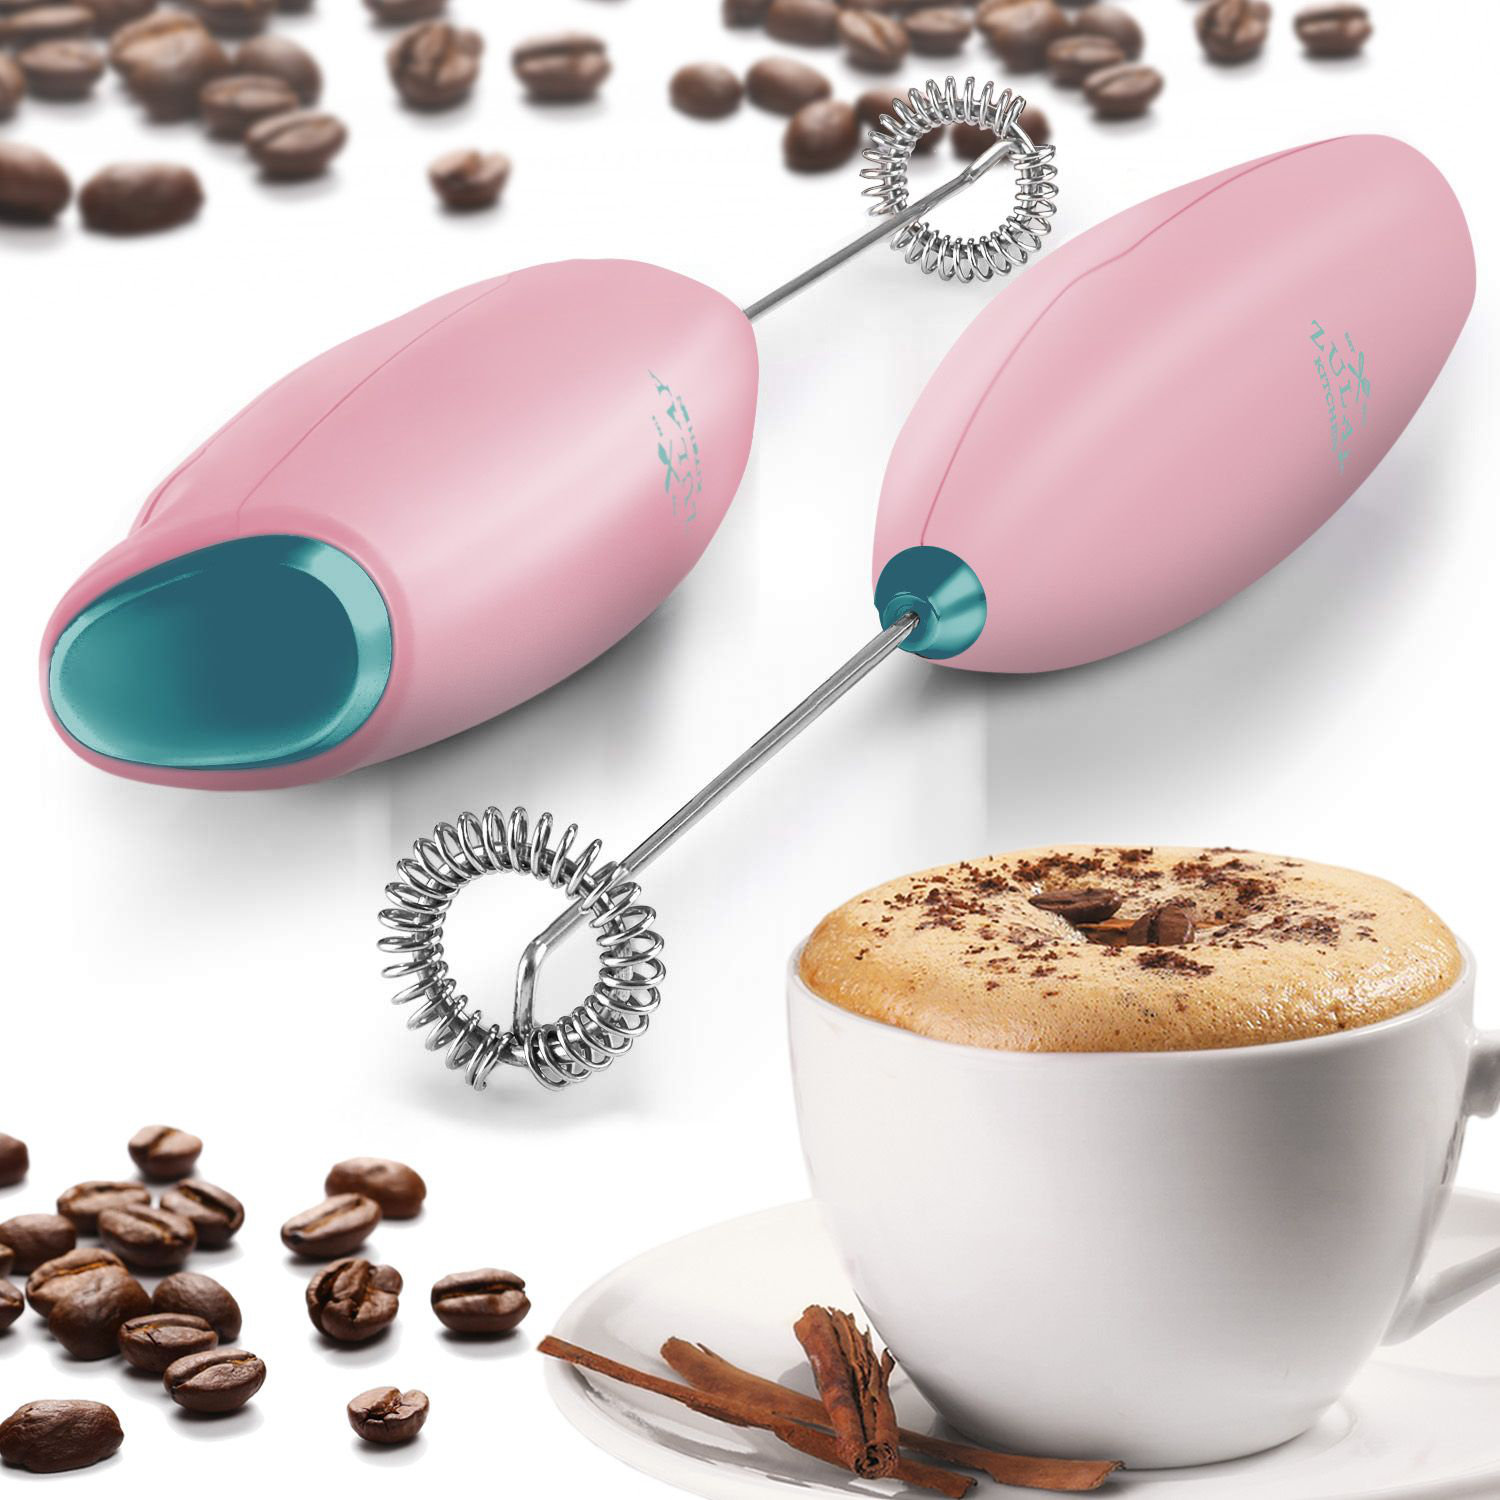 Zulay Kitchen Powerful Handheld Milk Frother for Coffee with Upgraded Titanium Motor - Silver